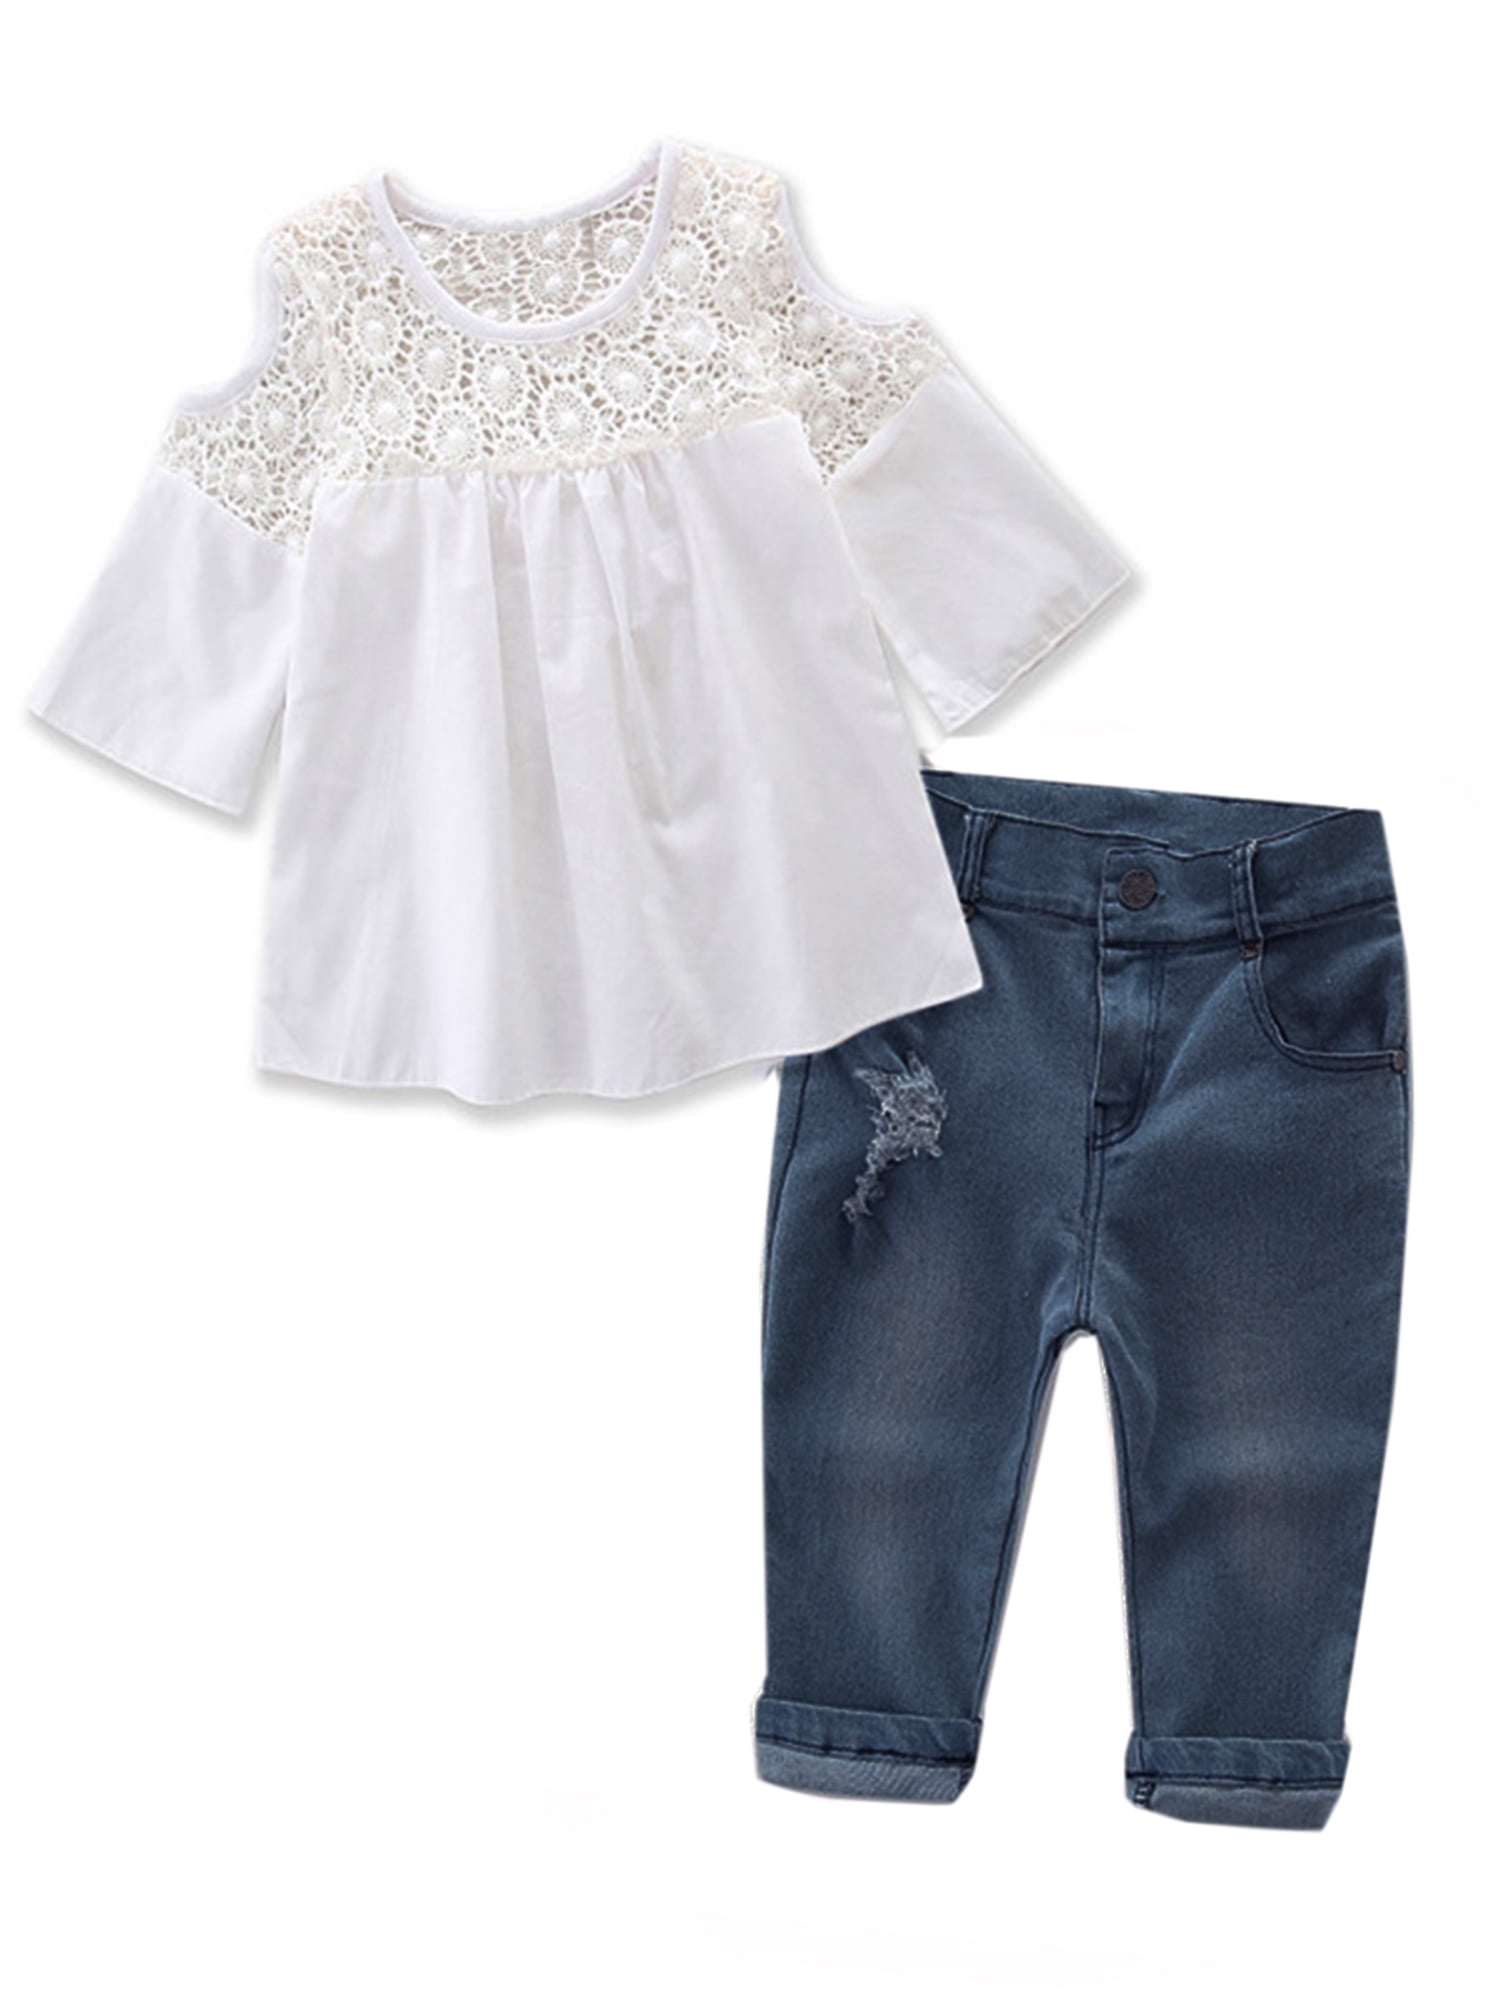 Flare Floral Trousers Ruffled Short-Sleeve Outfit Clothes Set Babywow Toddler Girl Off-Shoulder Halter T-Shirt Top 